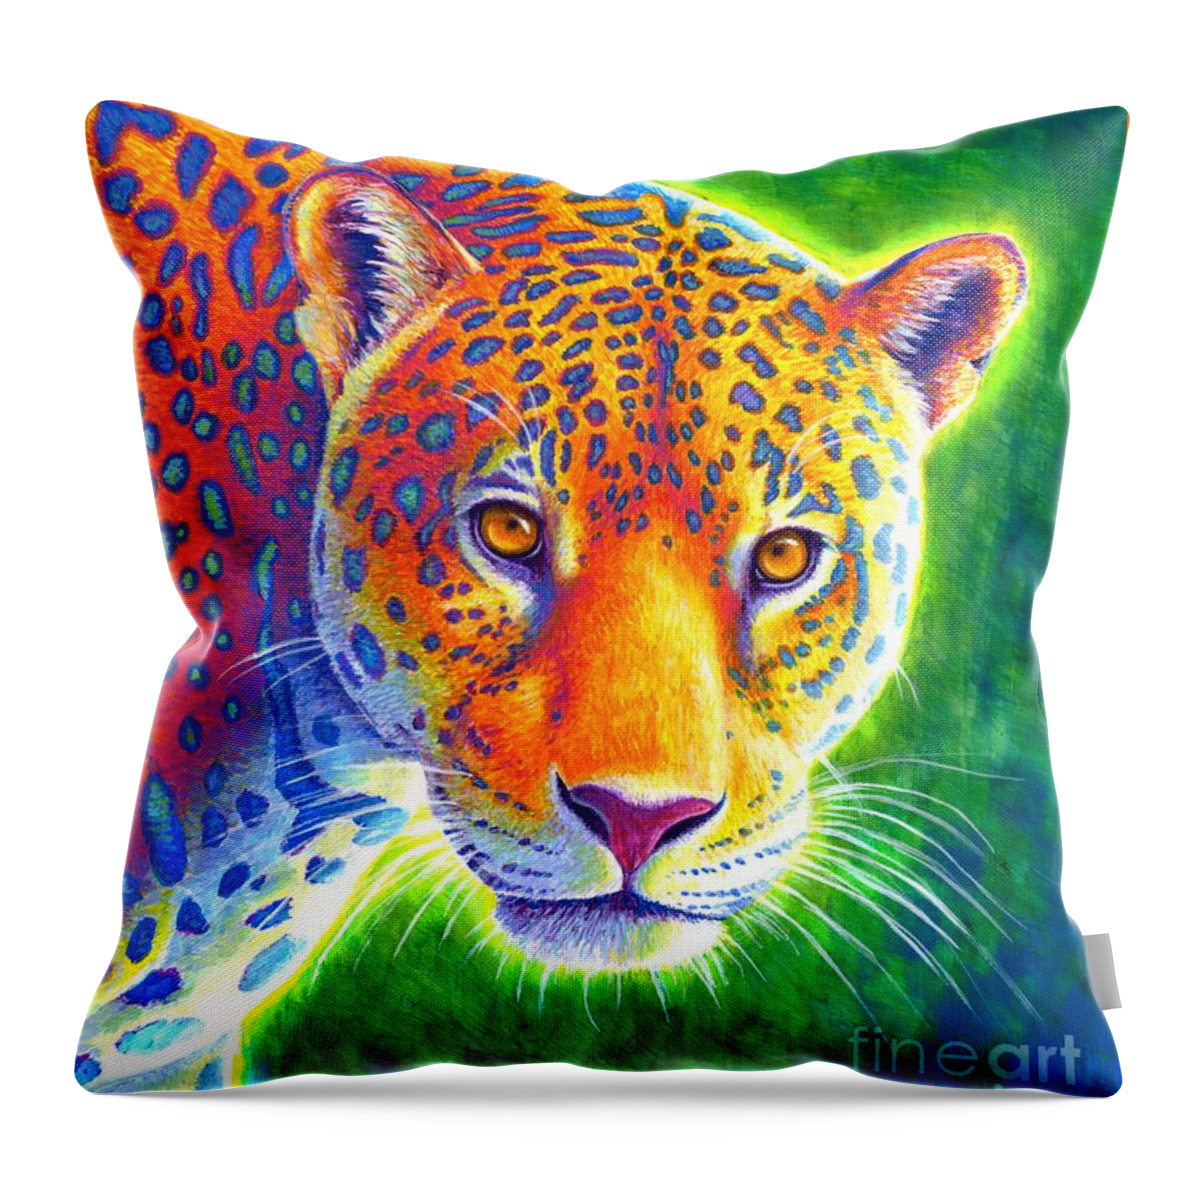 Jaguar Throw Pillow featuring the painting Light in the Rainforest - Jaguar by Rebecca Wang